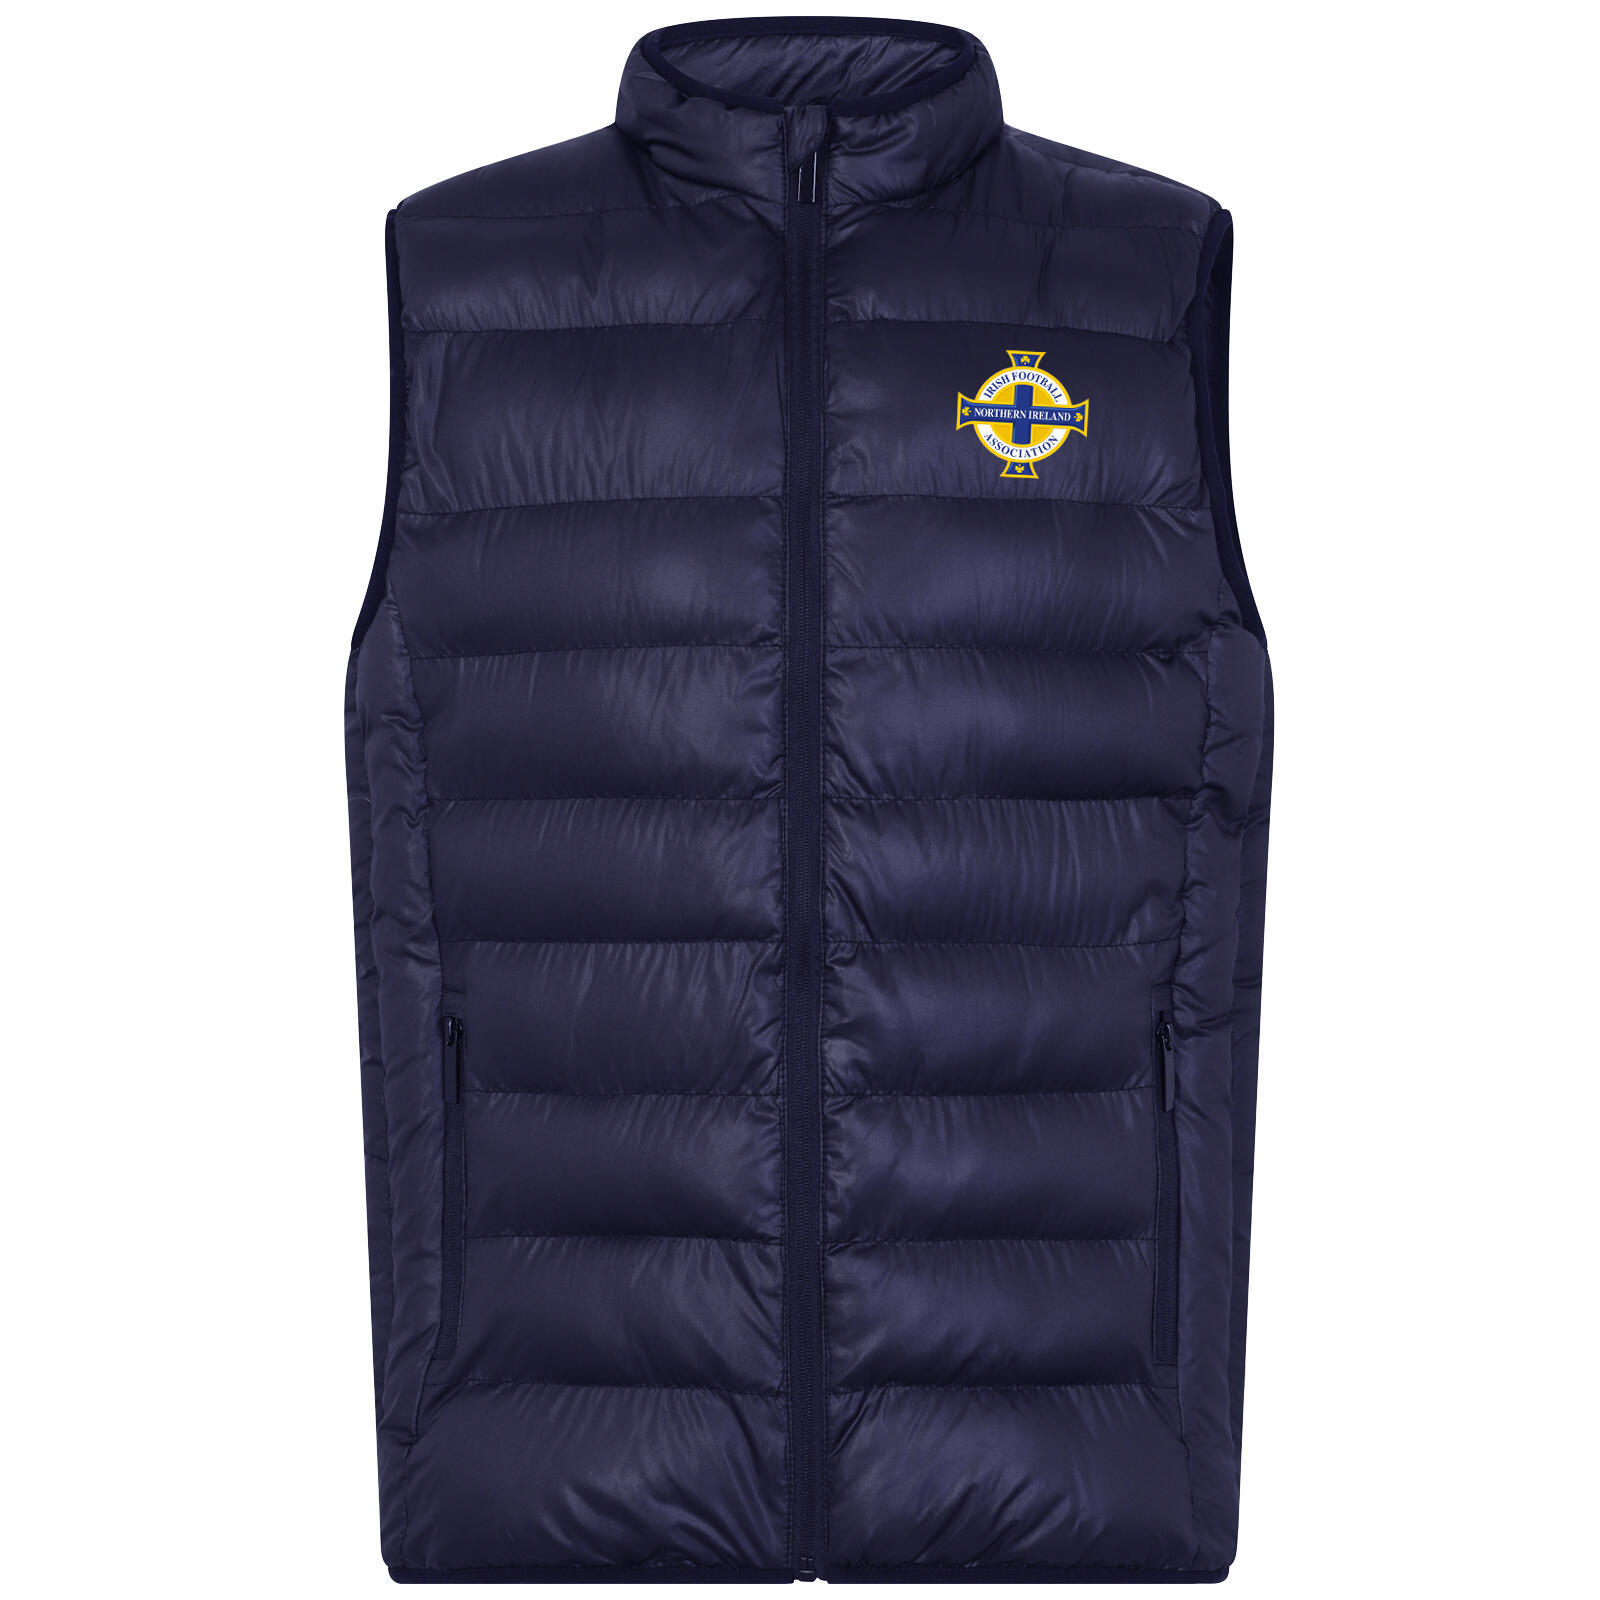 Northern Ireland Mens Gilet Jacket Body Warmer Padded OFFICIAL Football Gift 1/4